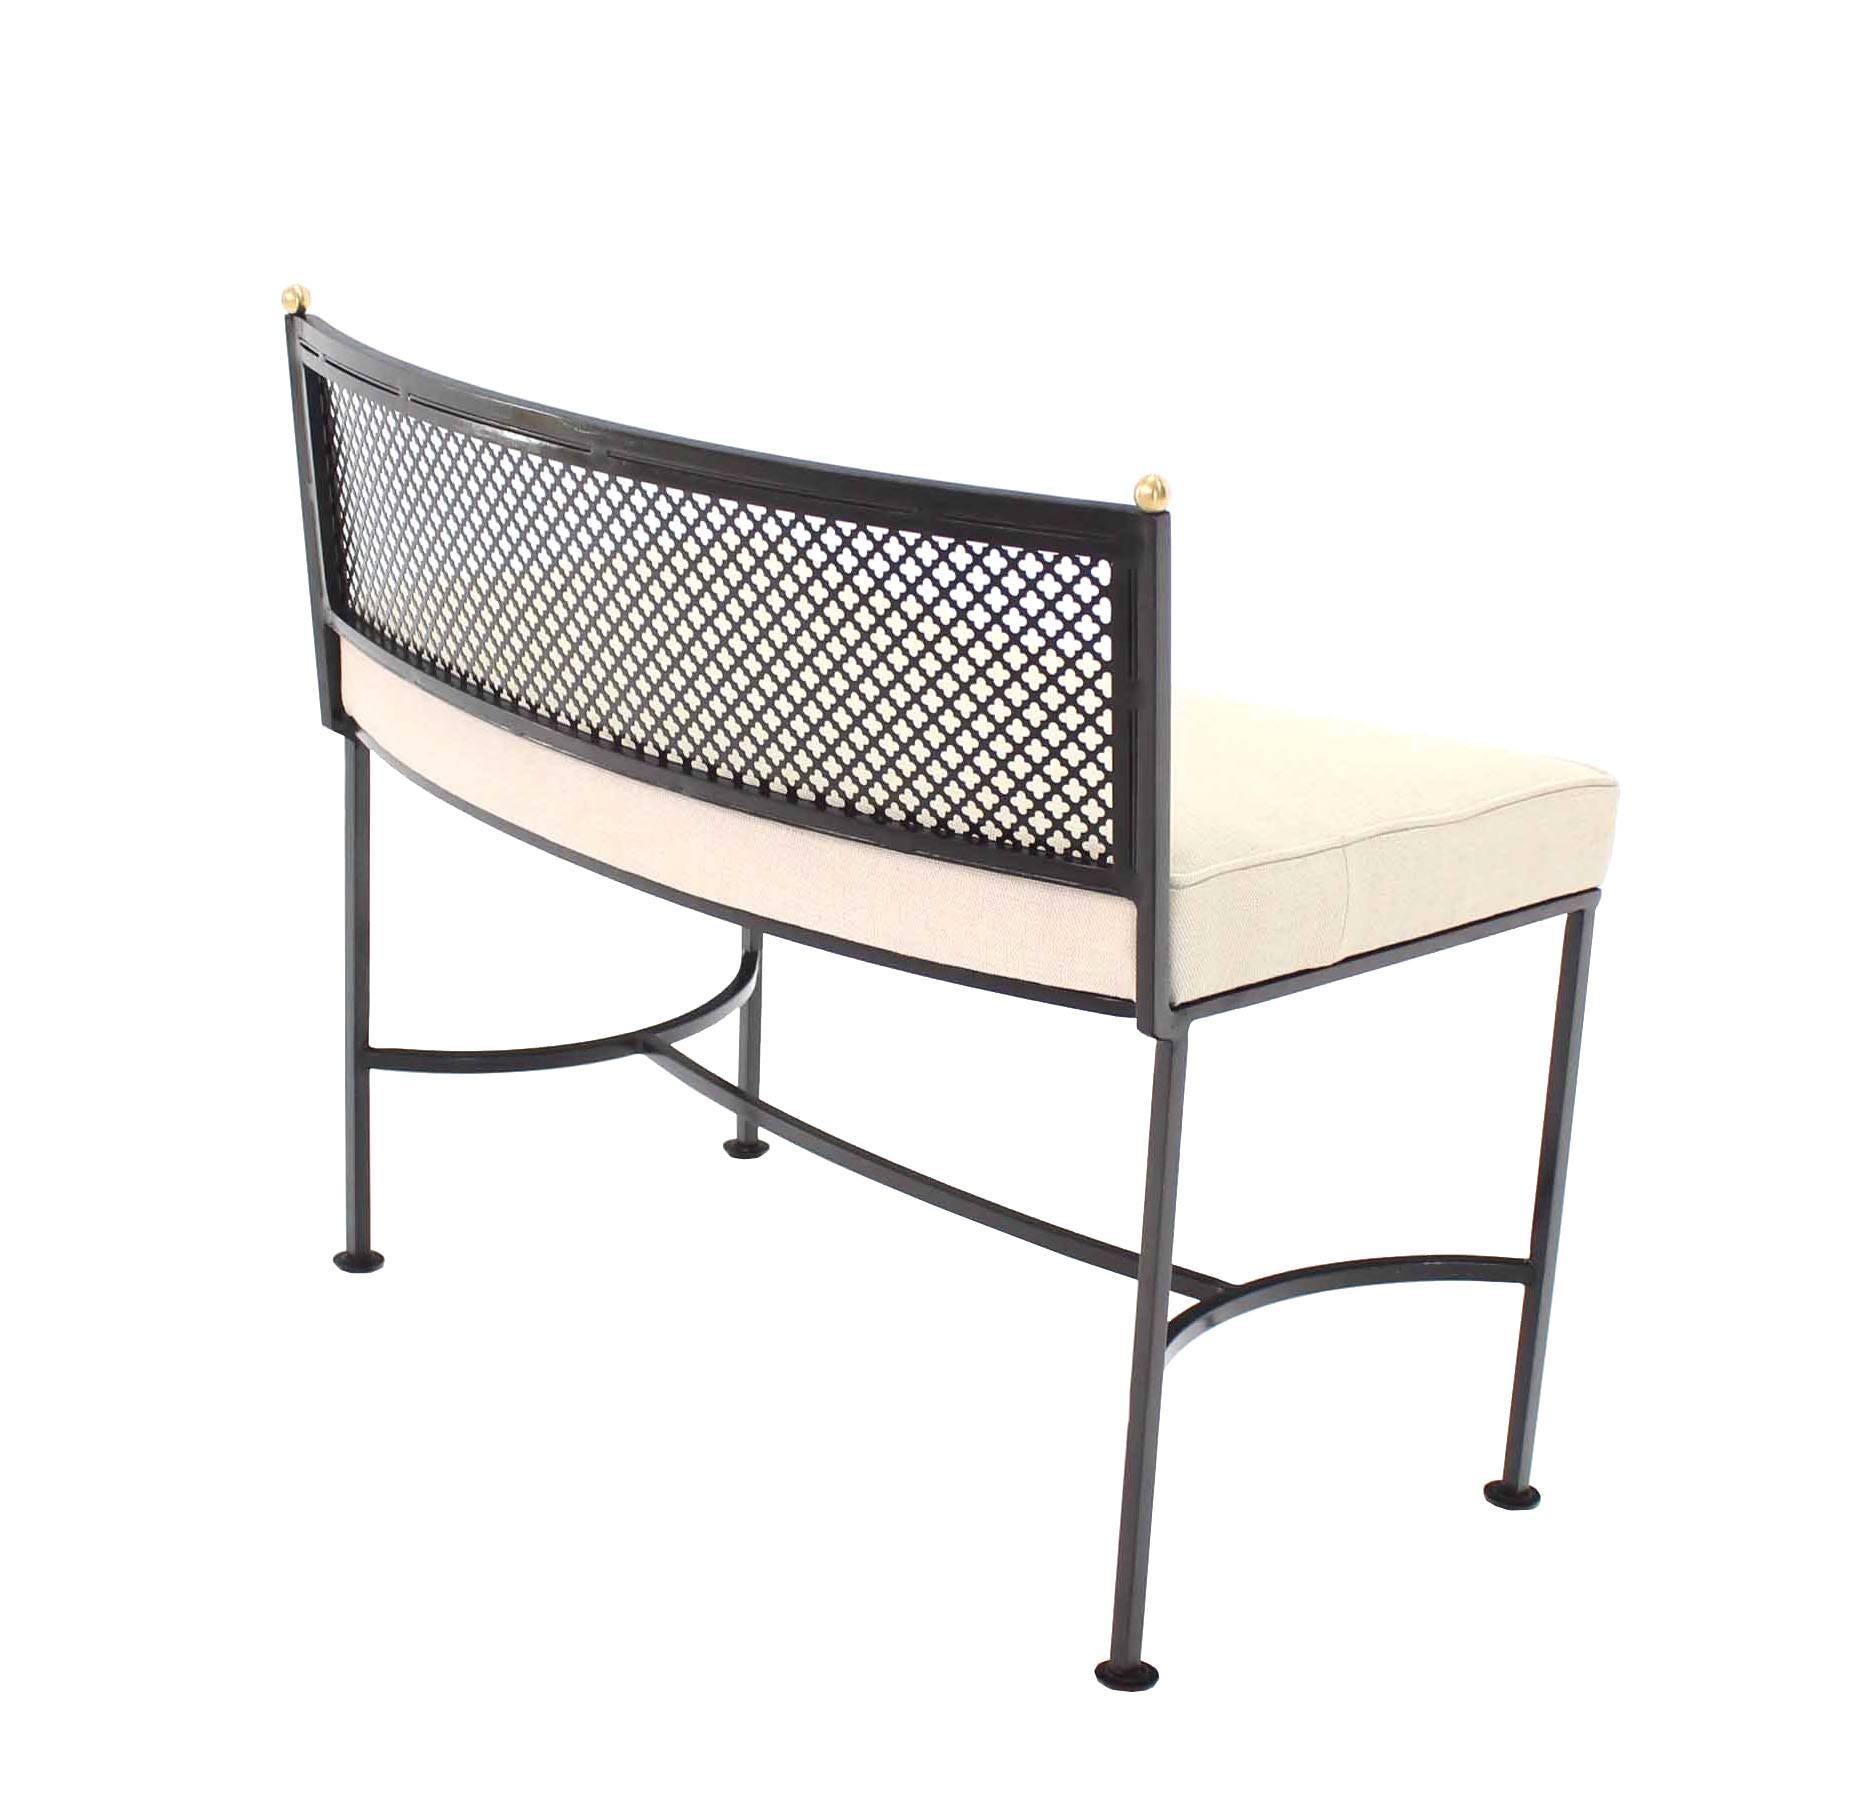 Painted Wrought Iron Curved Bench New Upholstery